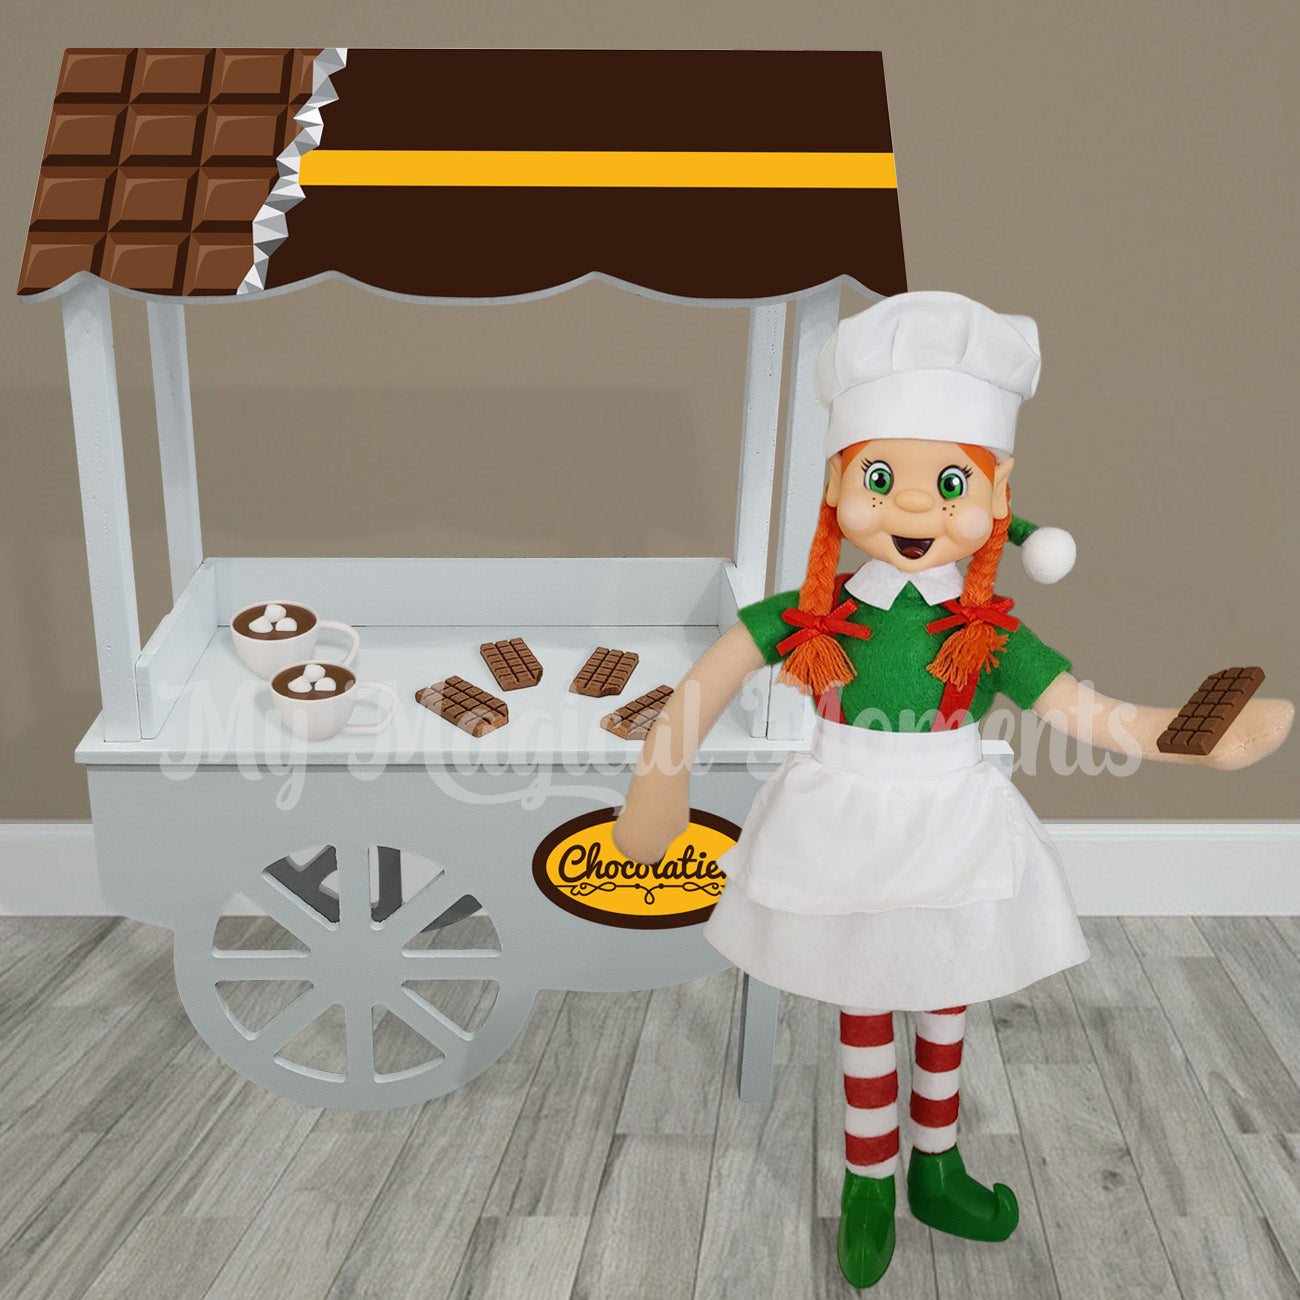 Elf dressed as a chef selling mini chocolate bars from their chocolatier shop